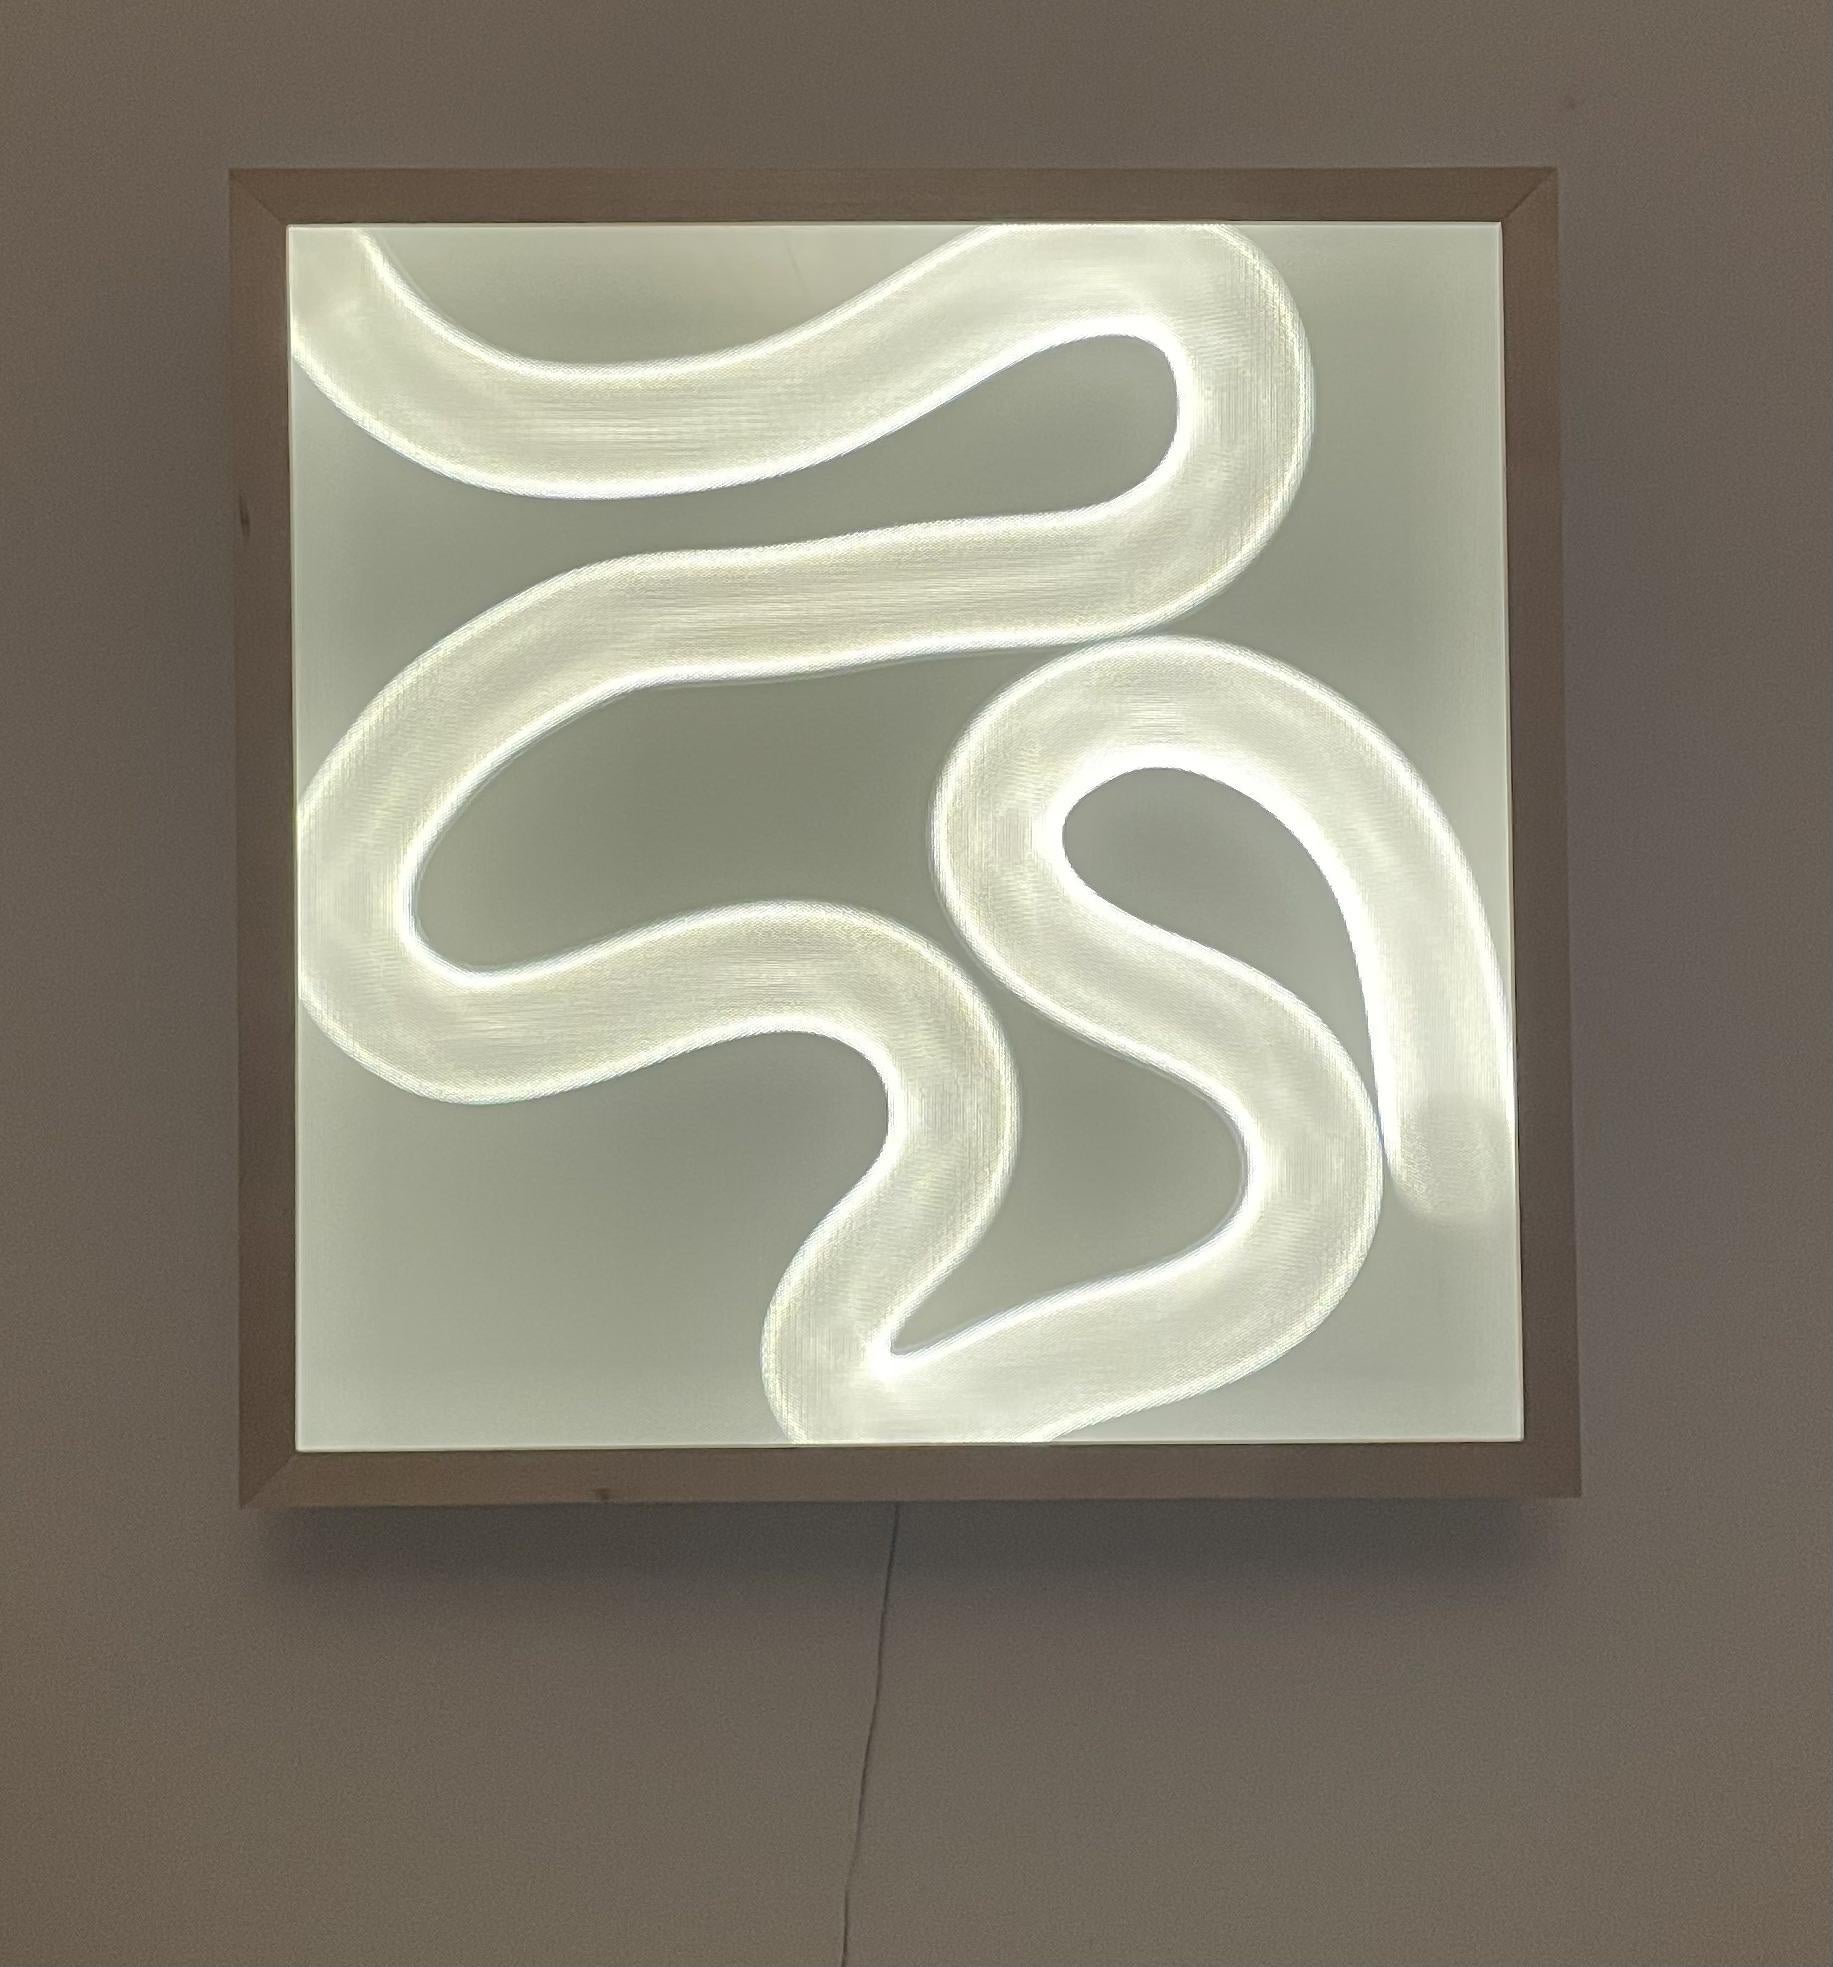 Aramse light sculpture by Studio Lampent
Limited Edition of 5
Dimensions: W 70 x D 13 x H 70 cm
Materials: Acrylic sheets, dimmable LED lights, wood.

All our lamps can be wired according to each country. If sold to the USA it will be wired for